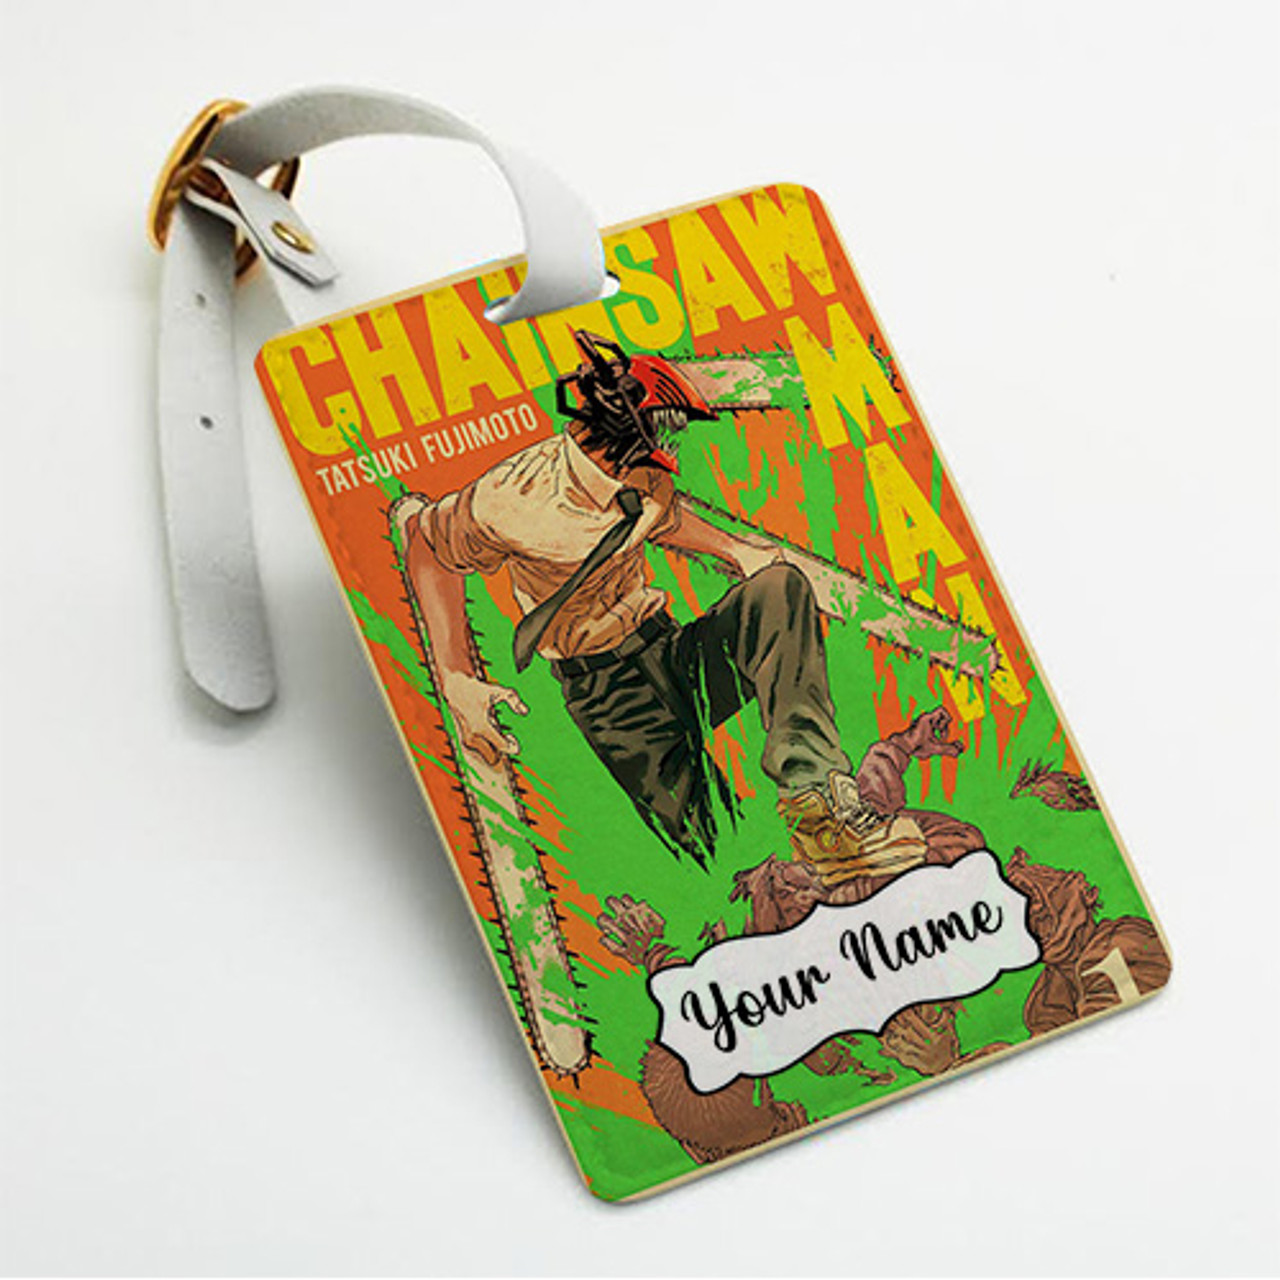 Personalized name tag, Luggage Tag, Bag Tag, Travel Tag, Suitcase